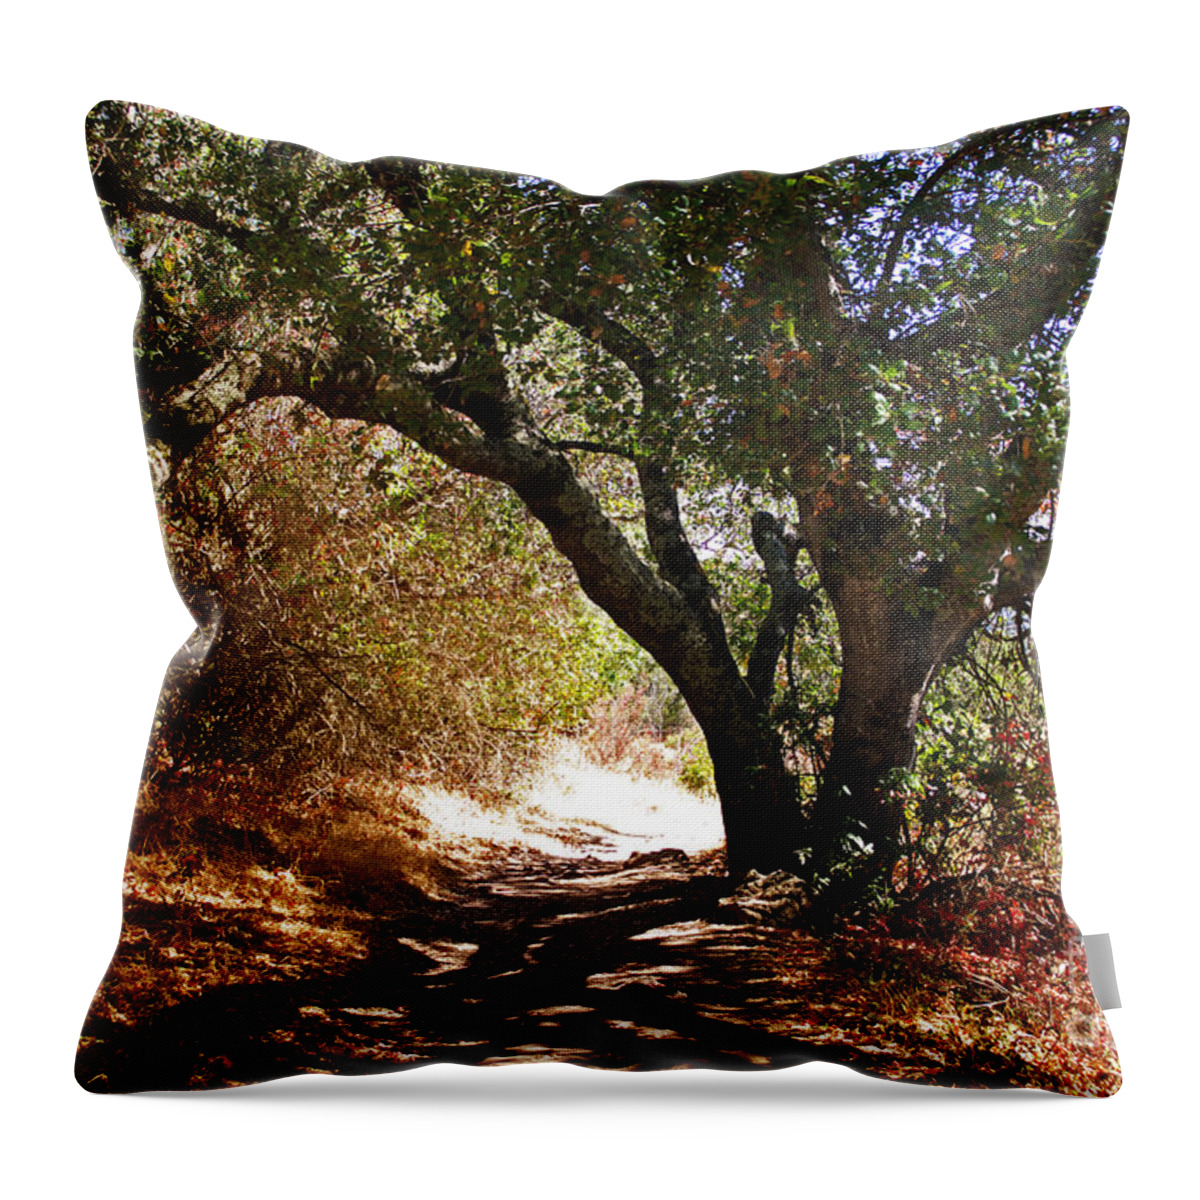 Oak Tree Throw Pillow featuring the photograph Oak Tree on Sylvan Trail by Laura Iverson